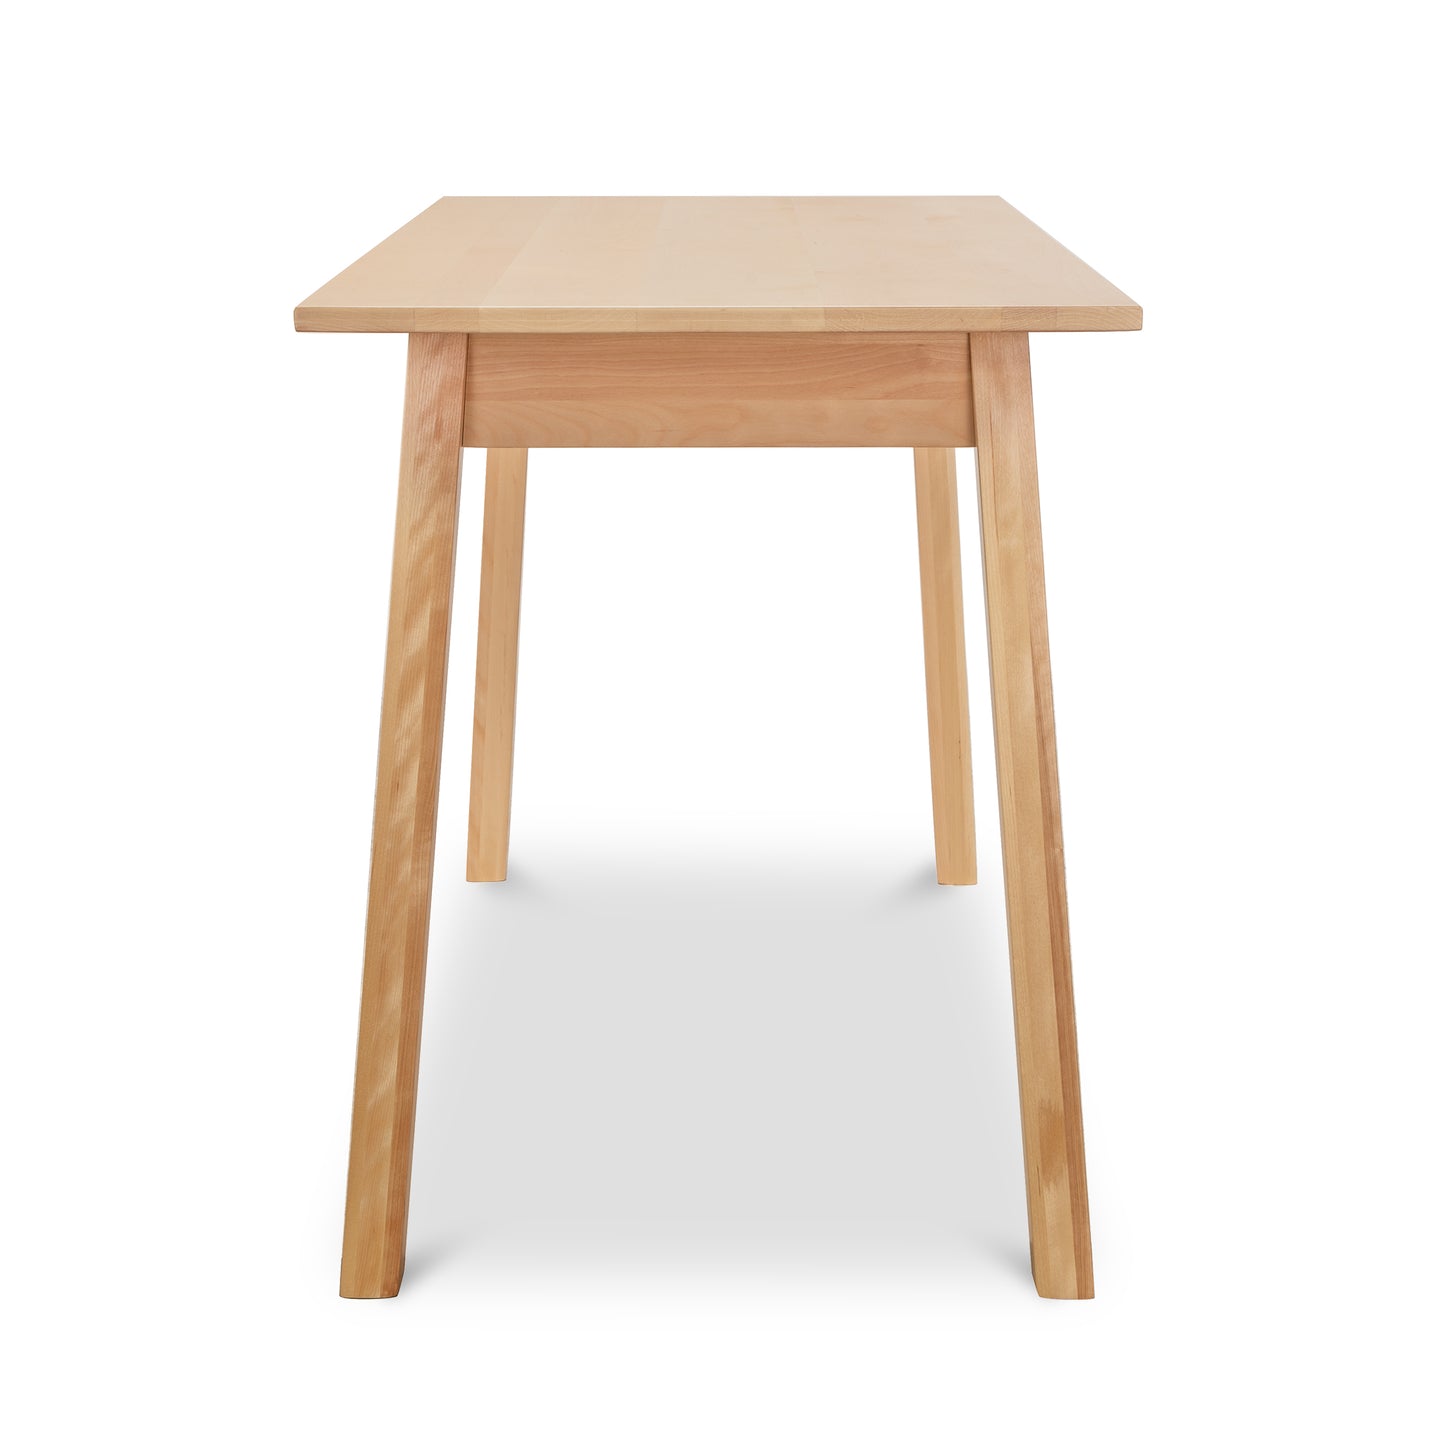 A small wooden table with legs on a white background.